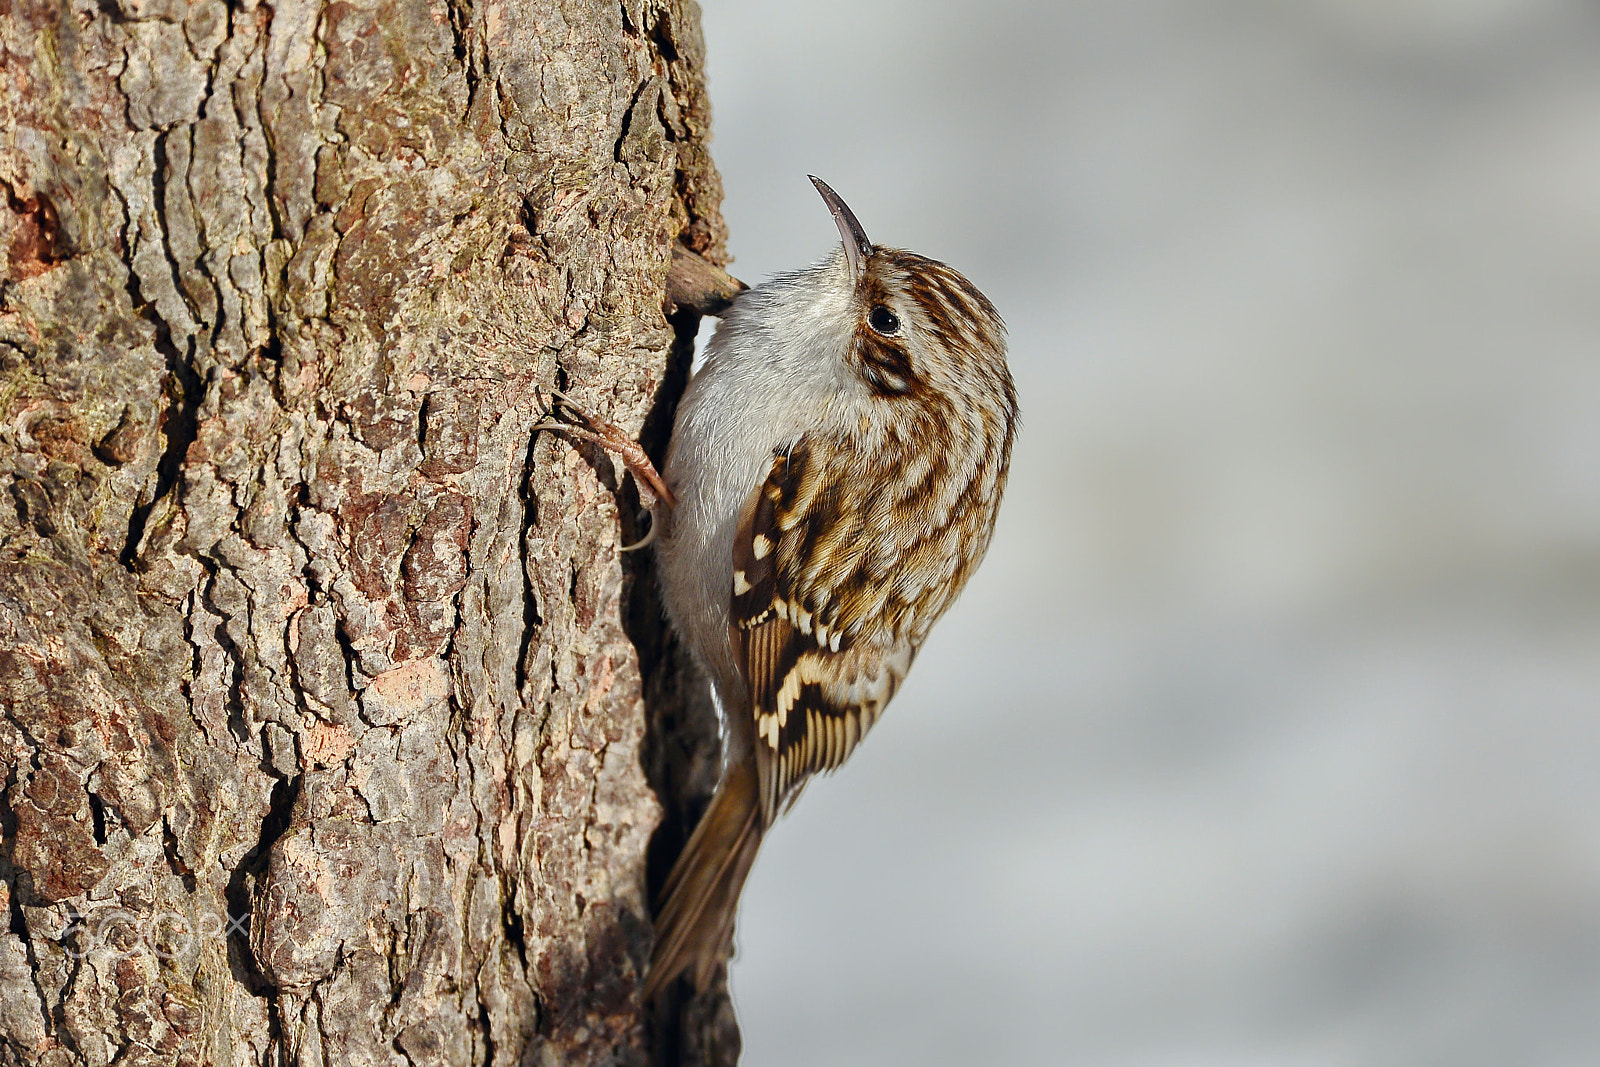 AF Zoom-Nikkor 35-80mm f/4-5.6D sample photo. Common treecreeper photography